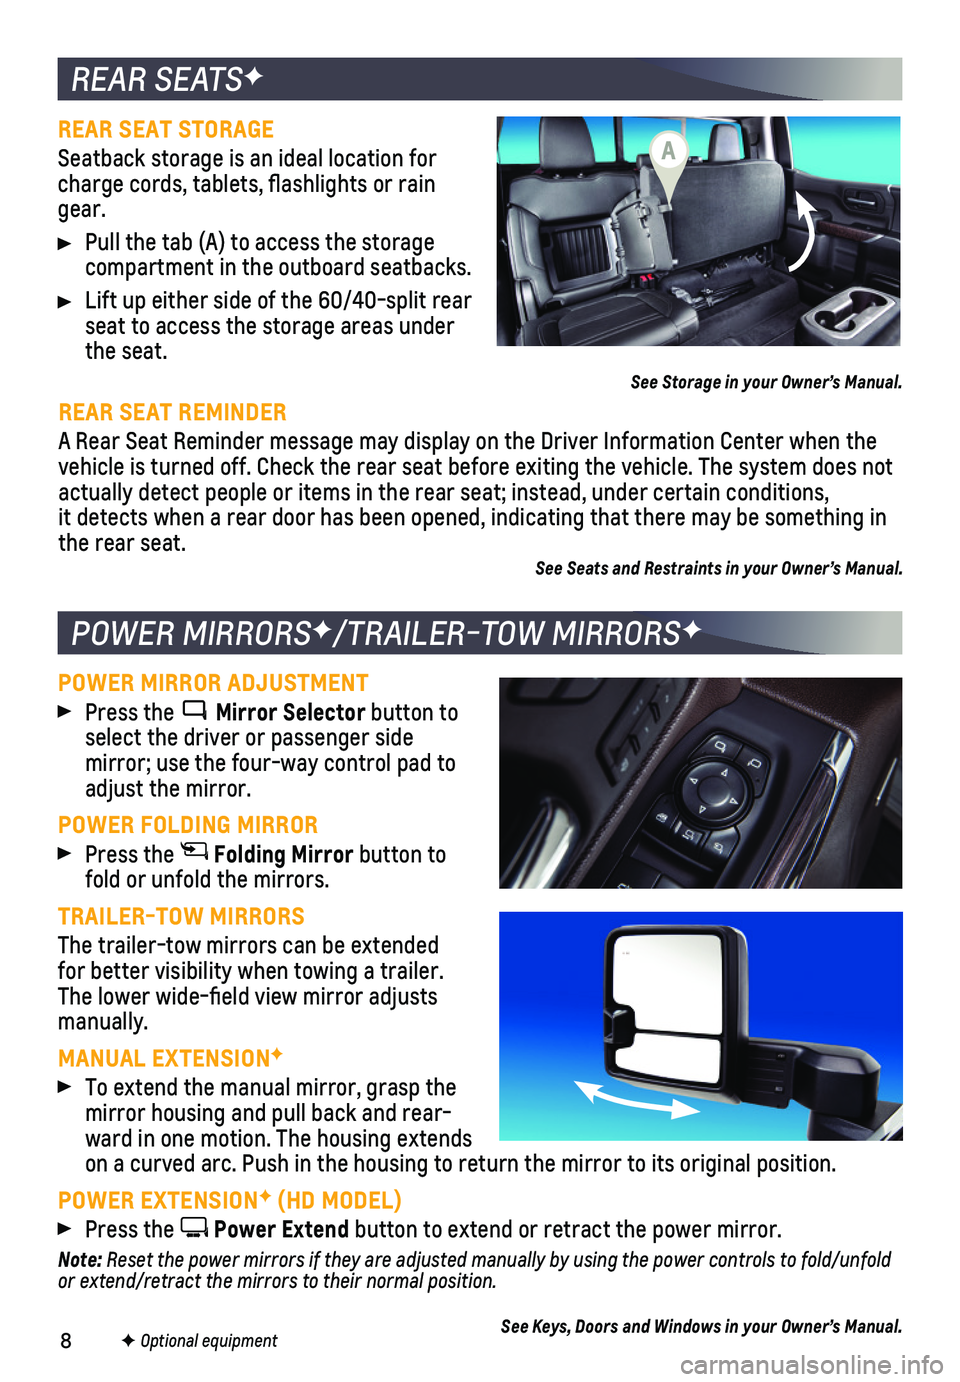 CHEVROLET SILVERADO 2020  Get To Know Guide 8
REAR SEATSF
POWER MIRRORSF/TRAILER-TOW MIRRORSF
REAR SEAT STORAGE 
Seatback storage is an ideal location for charge cords, tablets, flashlights or rain gear.
 Pull the tab (A) to access the storage 